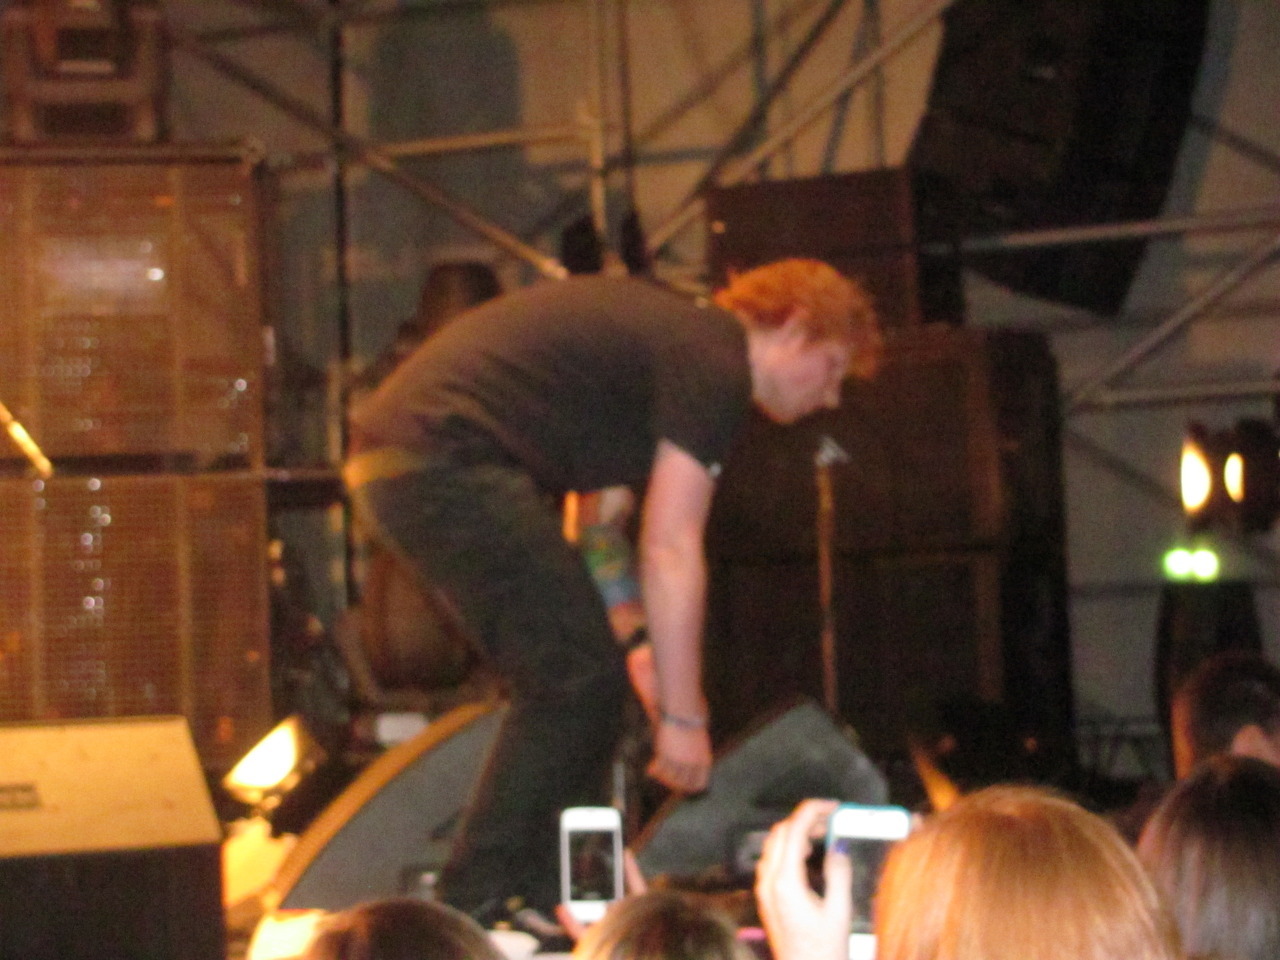 liamgivesmechestpaynes:  On 9-23-12 Was the Ed Sheeran concert in Philly. During